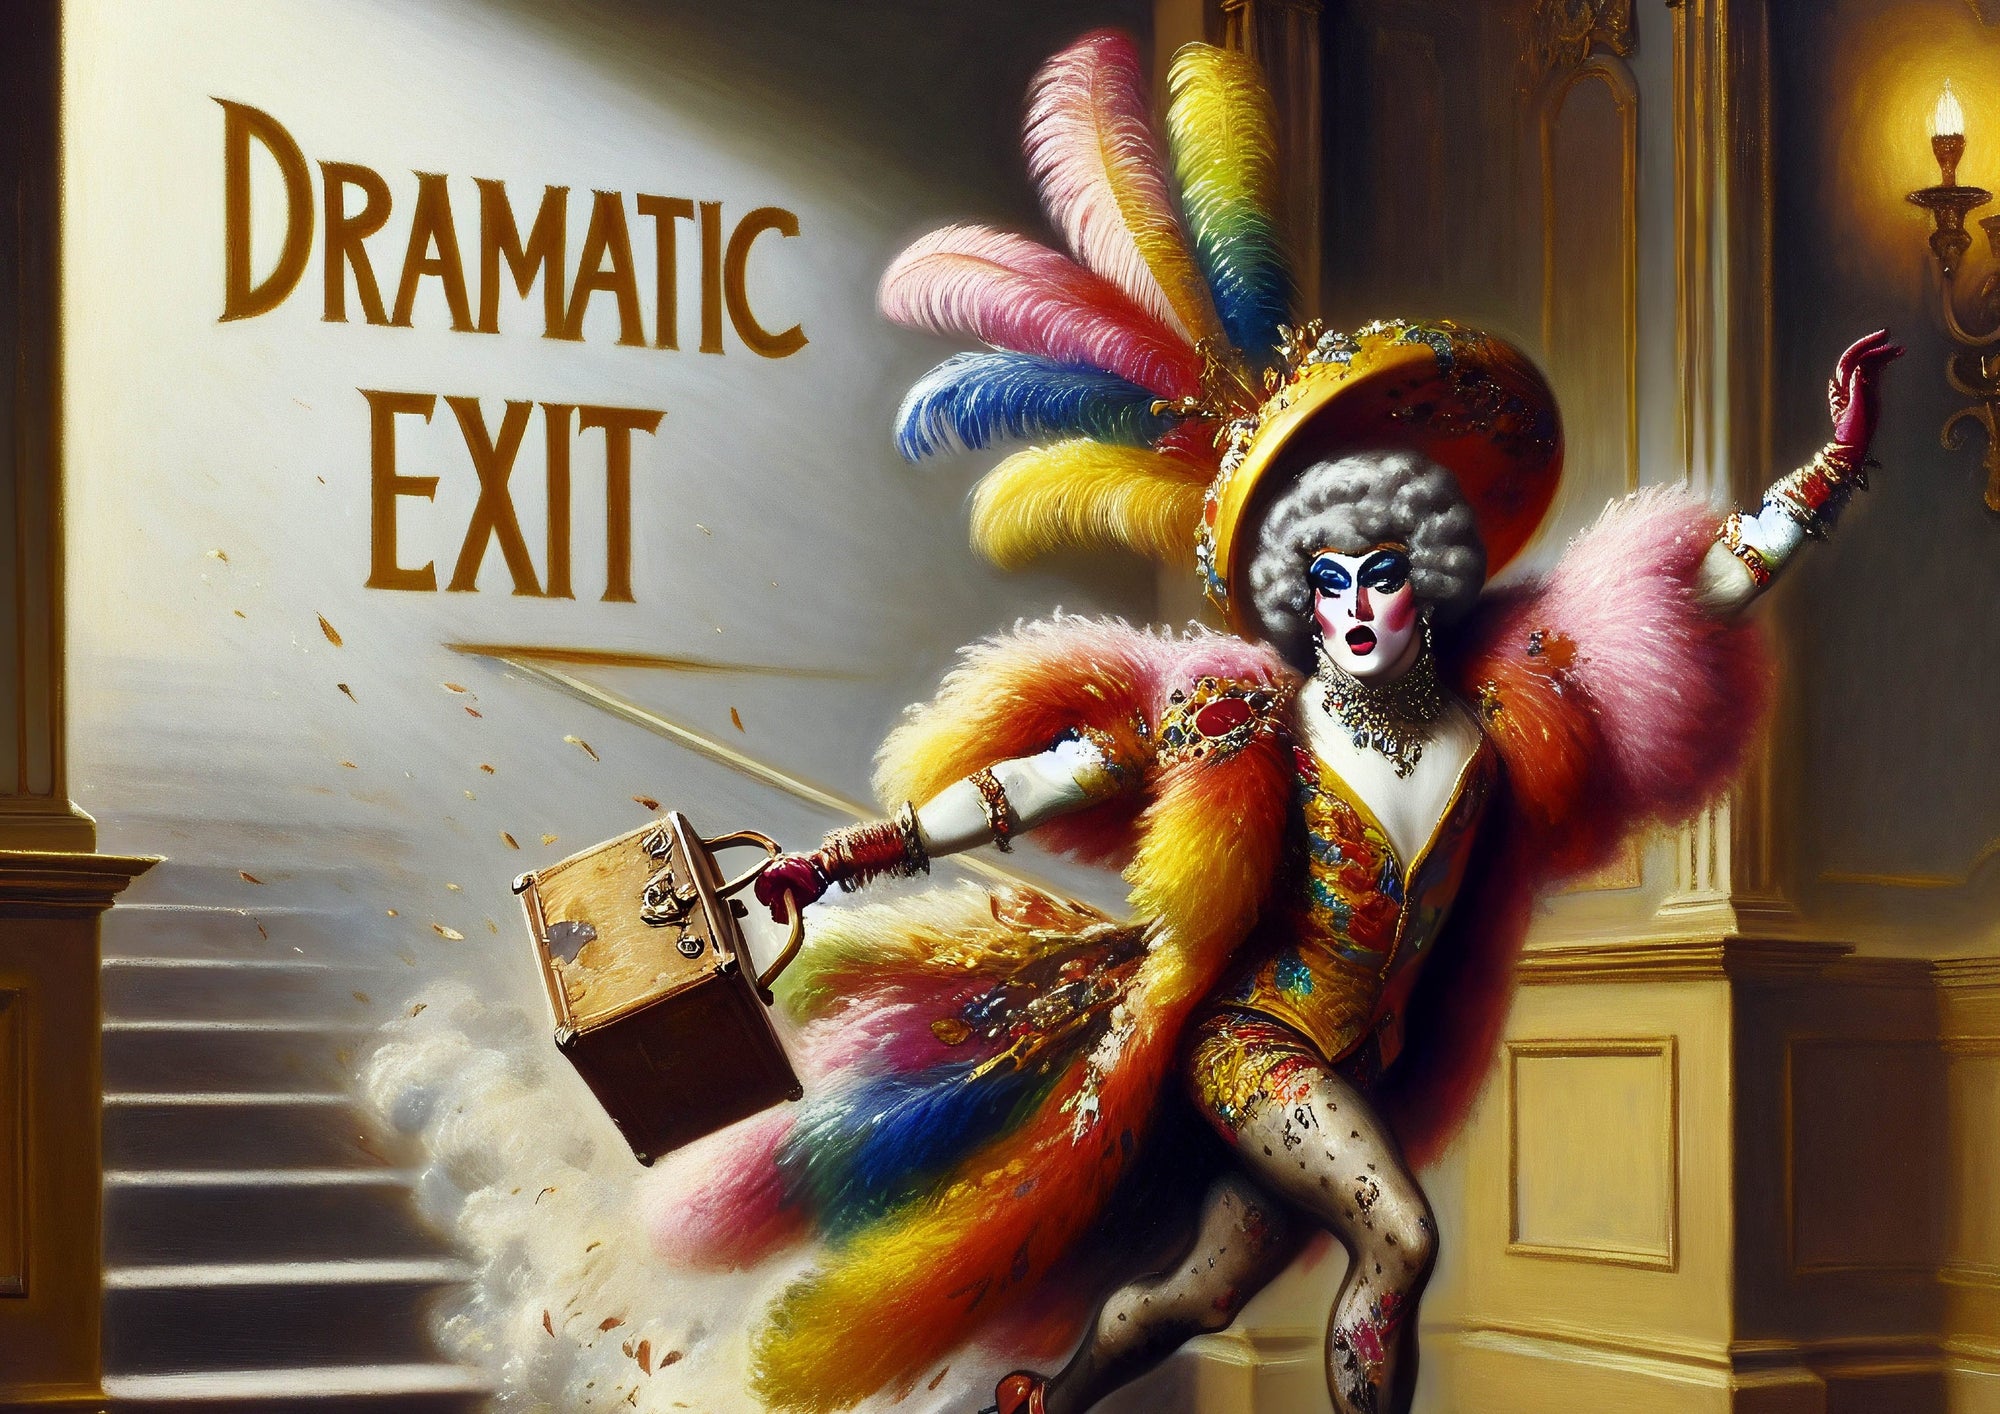 Muck N Brass Posters, Prints, &amp; Visual Artwork A4 The Dramatic Exit Print